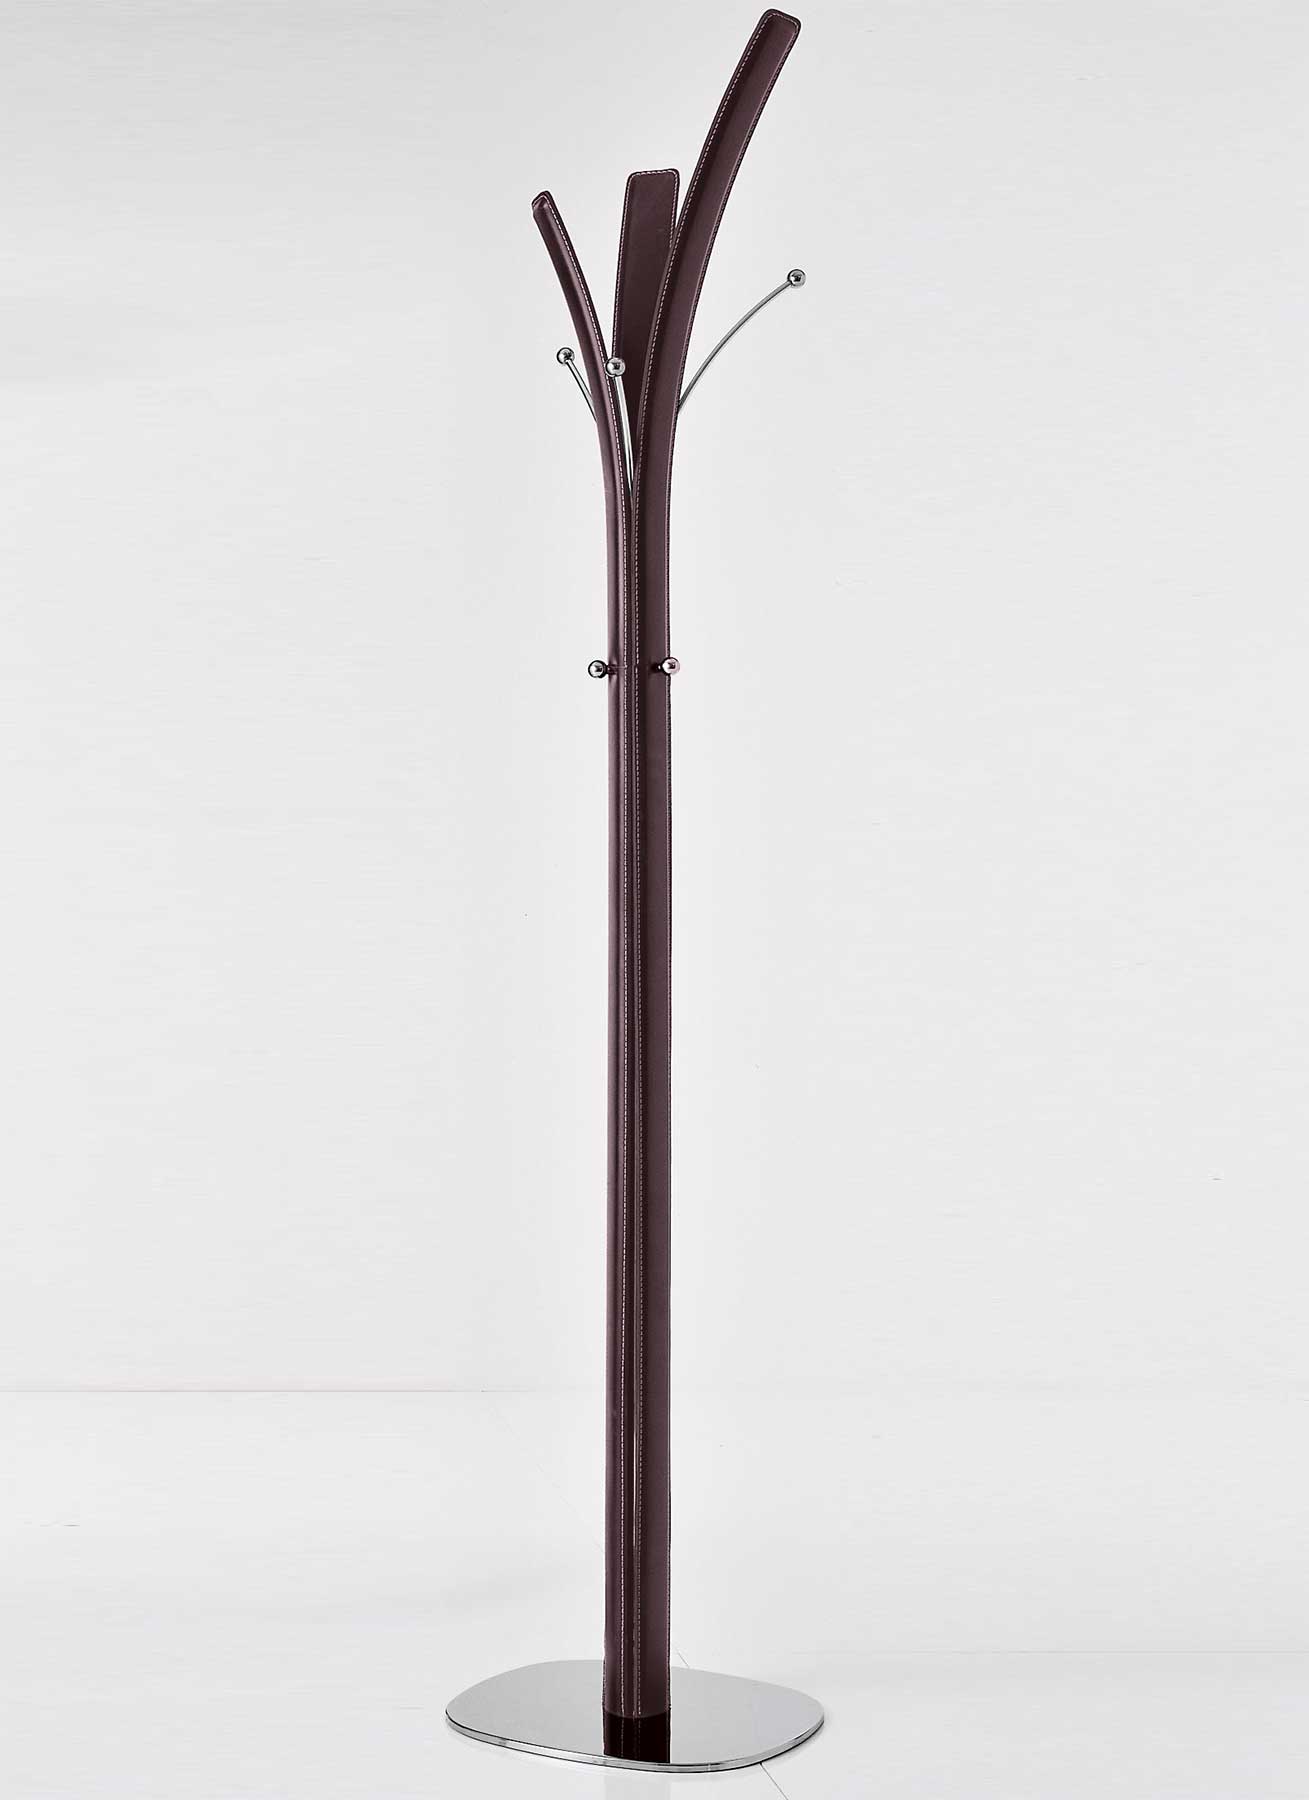 Refined clothes stand designed by Arter and Citton. Covered with regenerated leather. Metal frame, chromed details. Home delivery, online shopping.